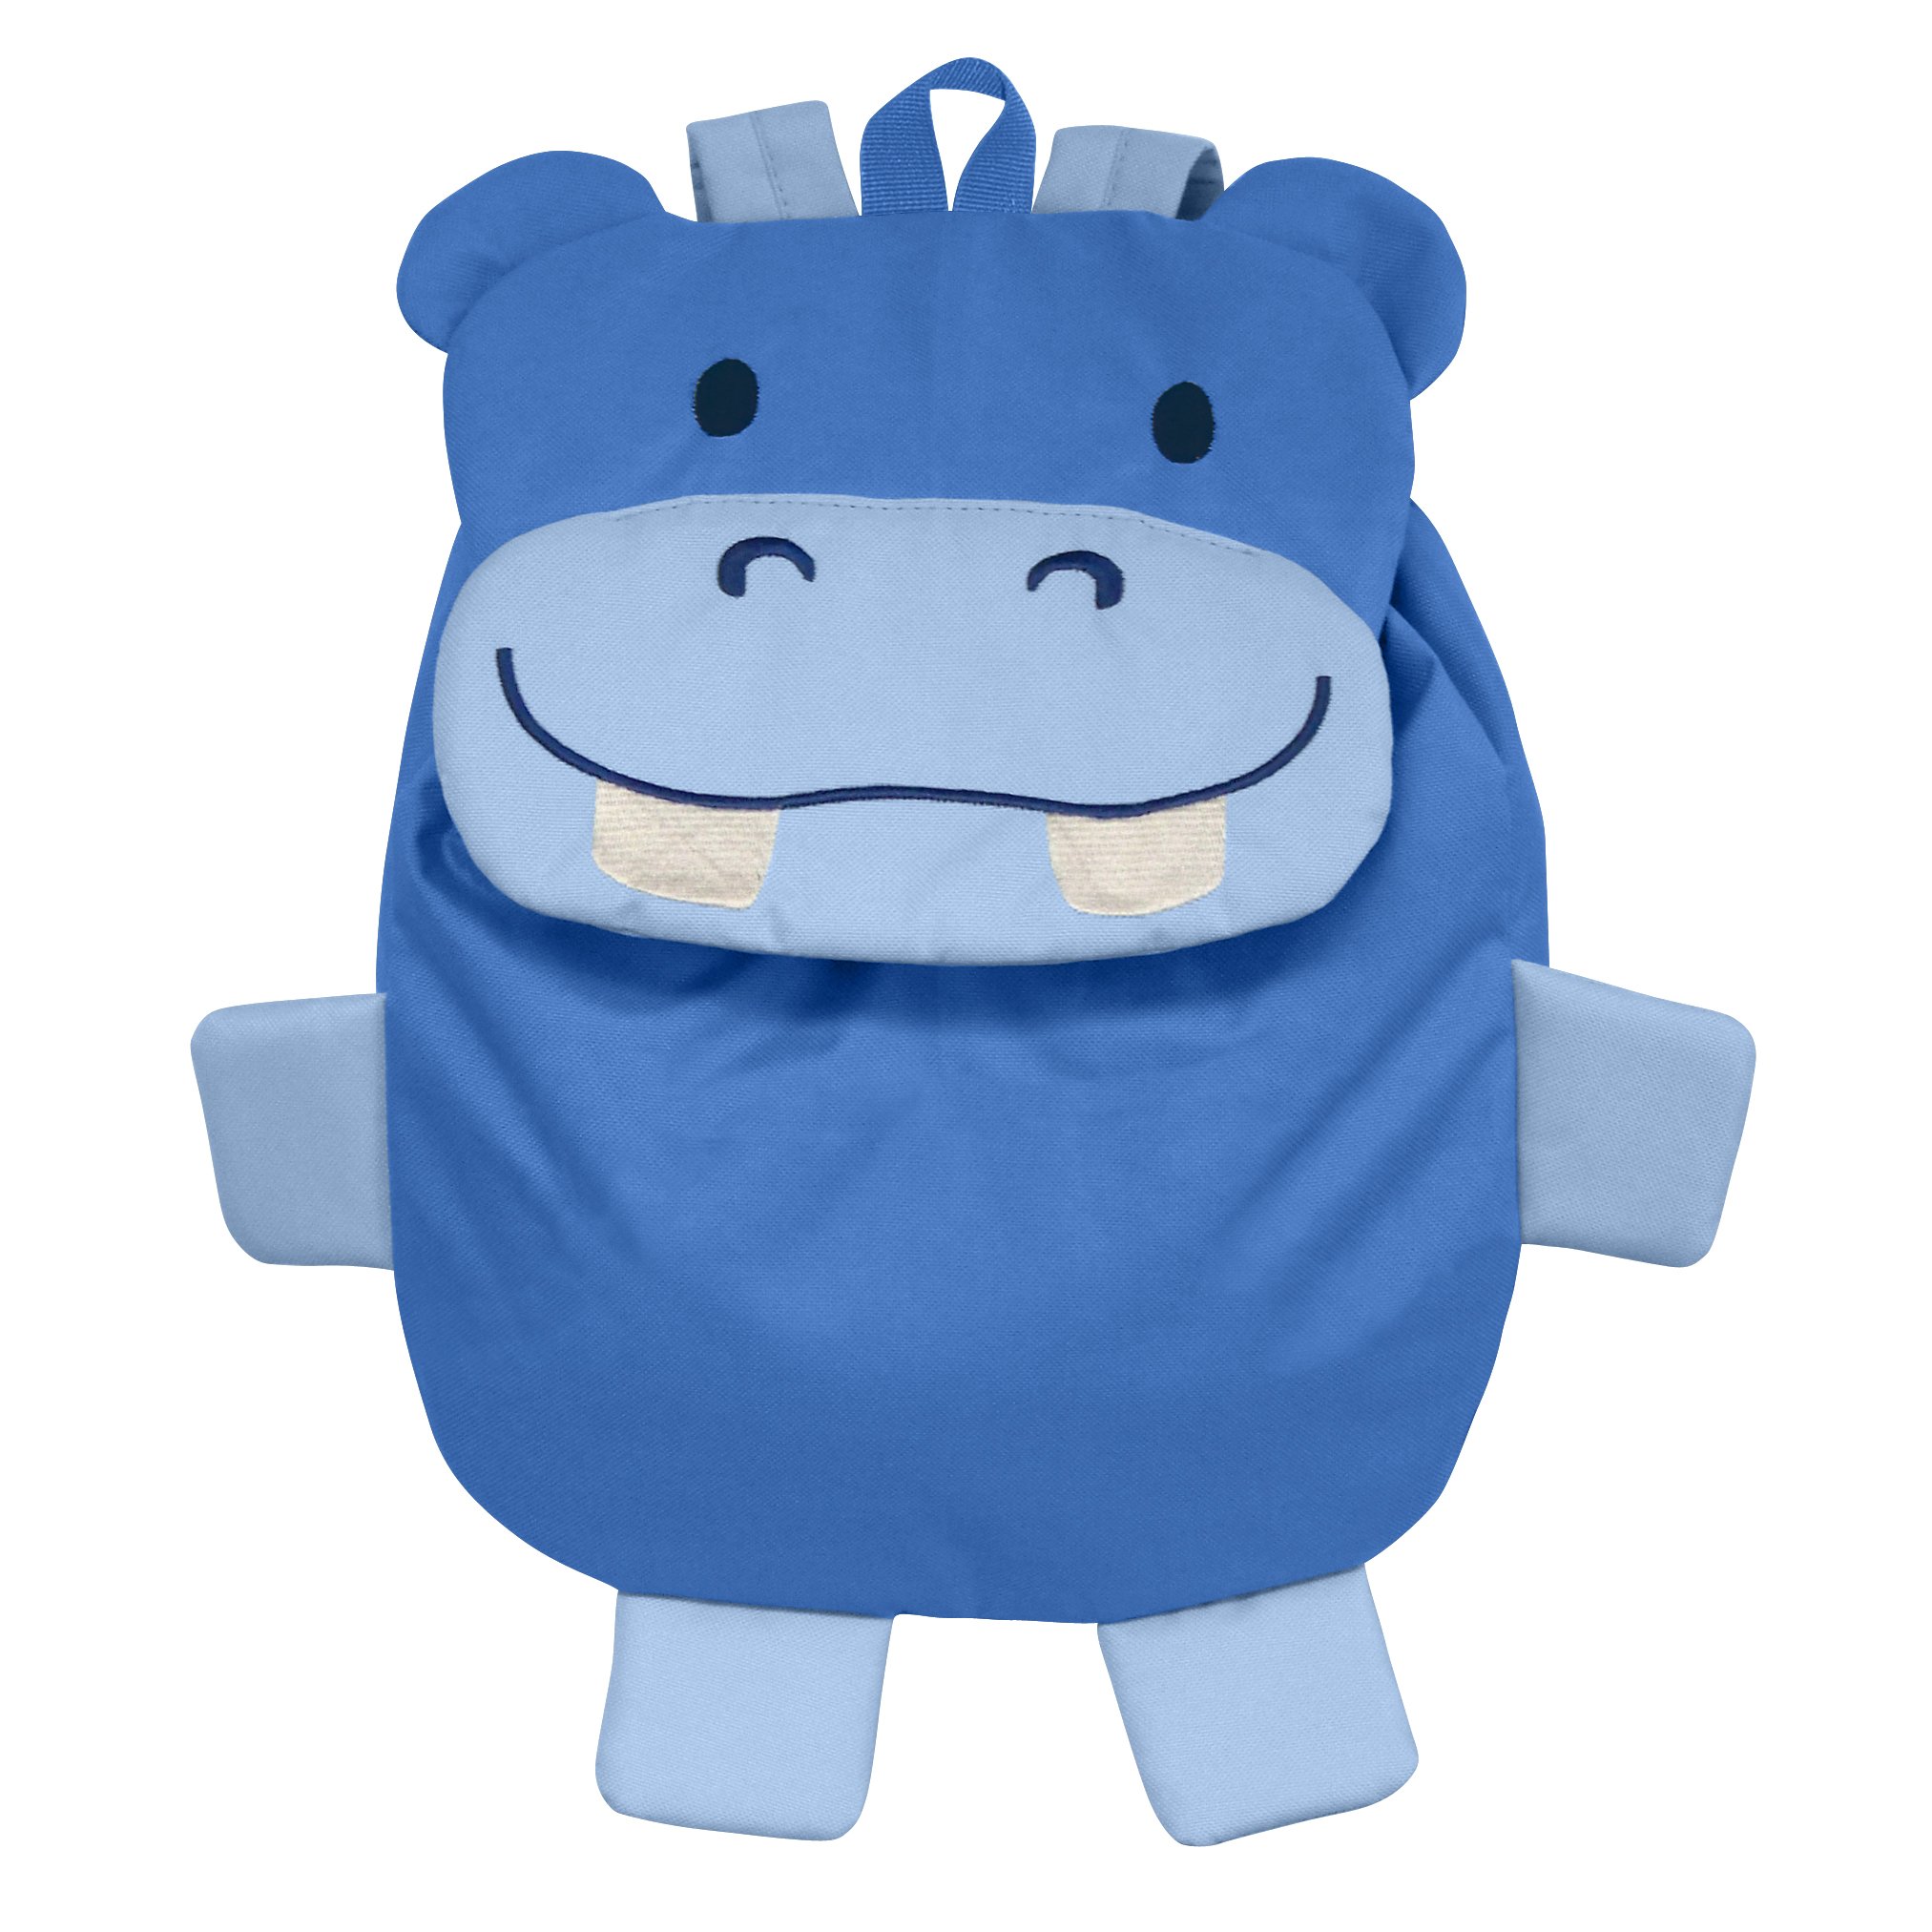 green sprouts Safari Friends Backpack, Blue Hippo - image 1 of 2